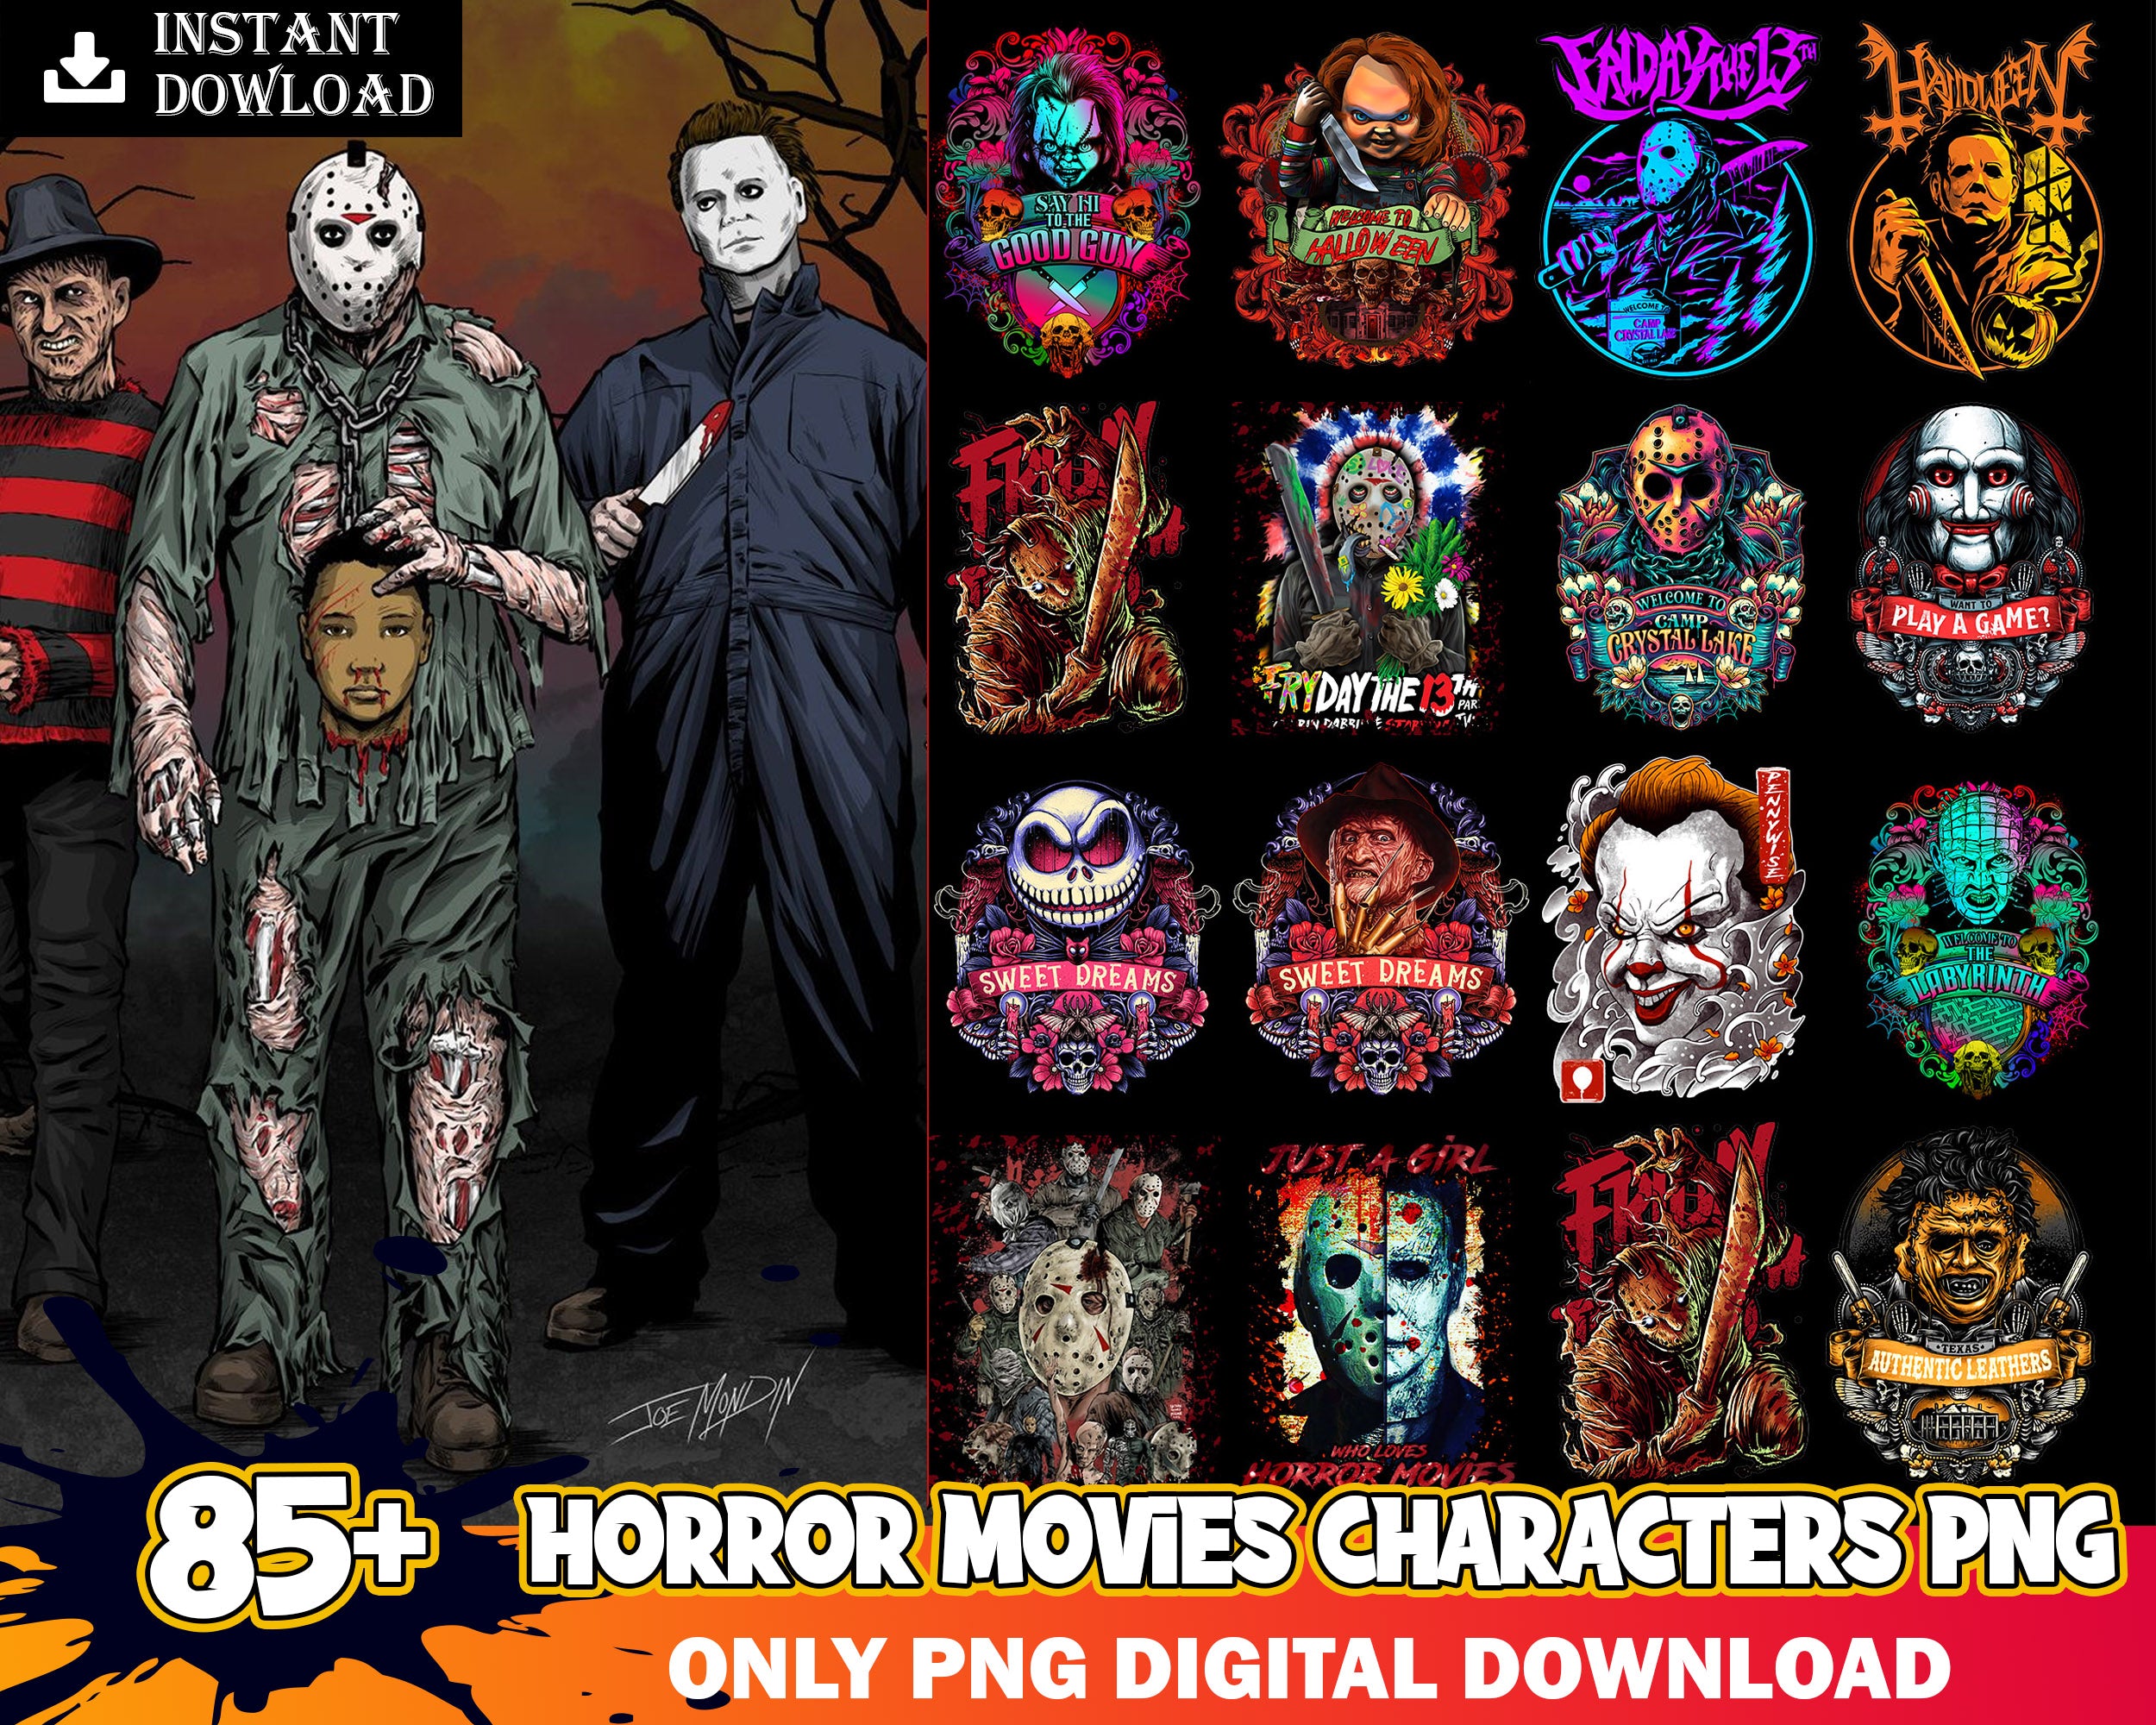 New 85+ Horror Movies Characters PNG, Halloween Sublimation Designs Png, Halloween Bundle Png, Horror Movies